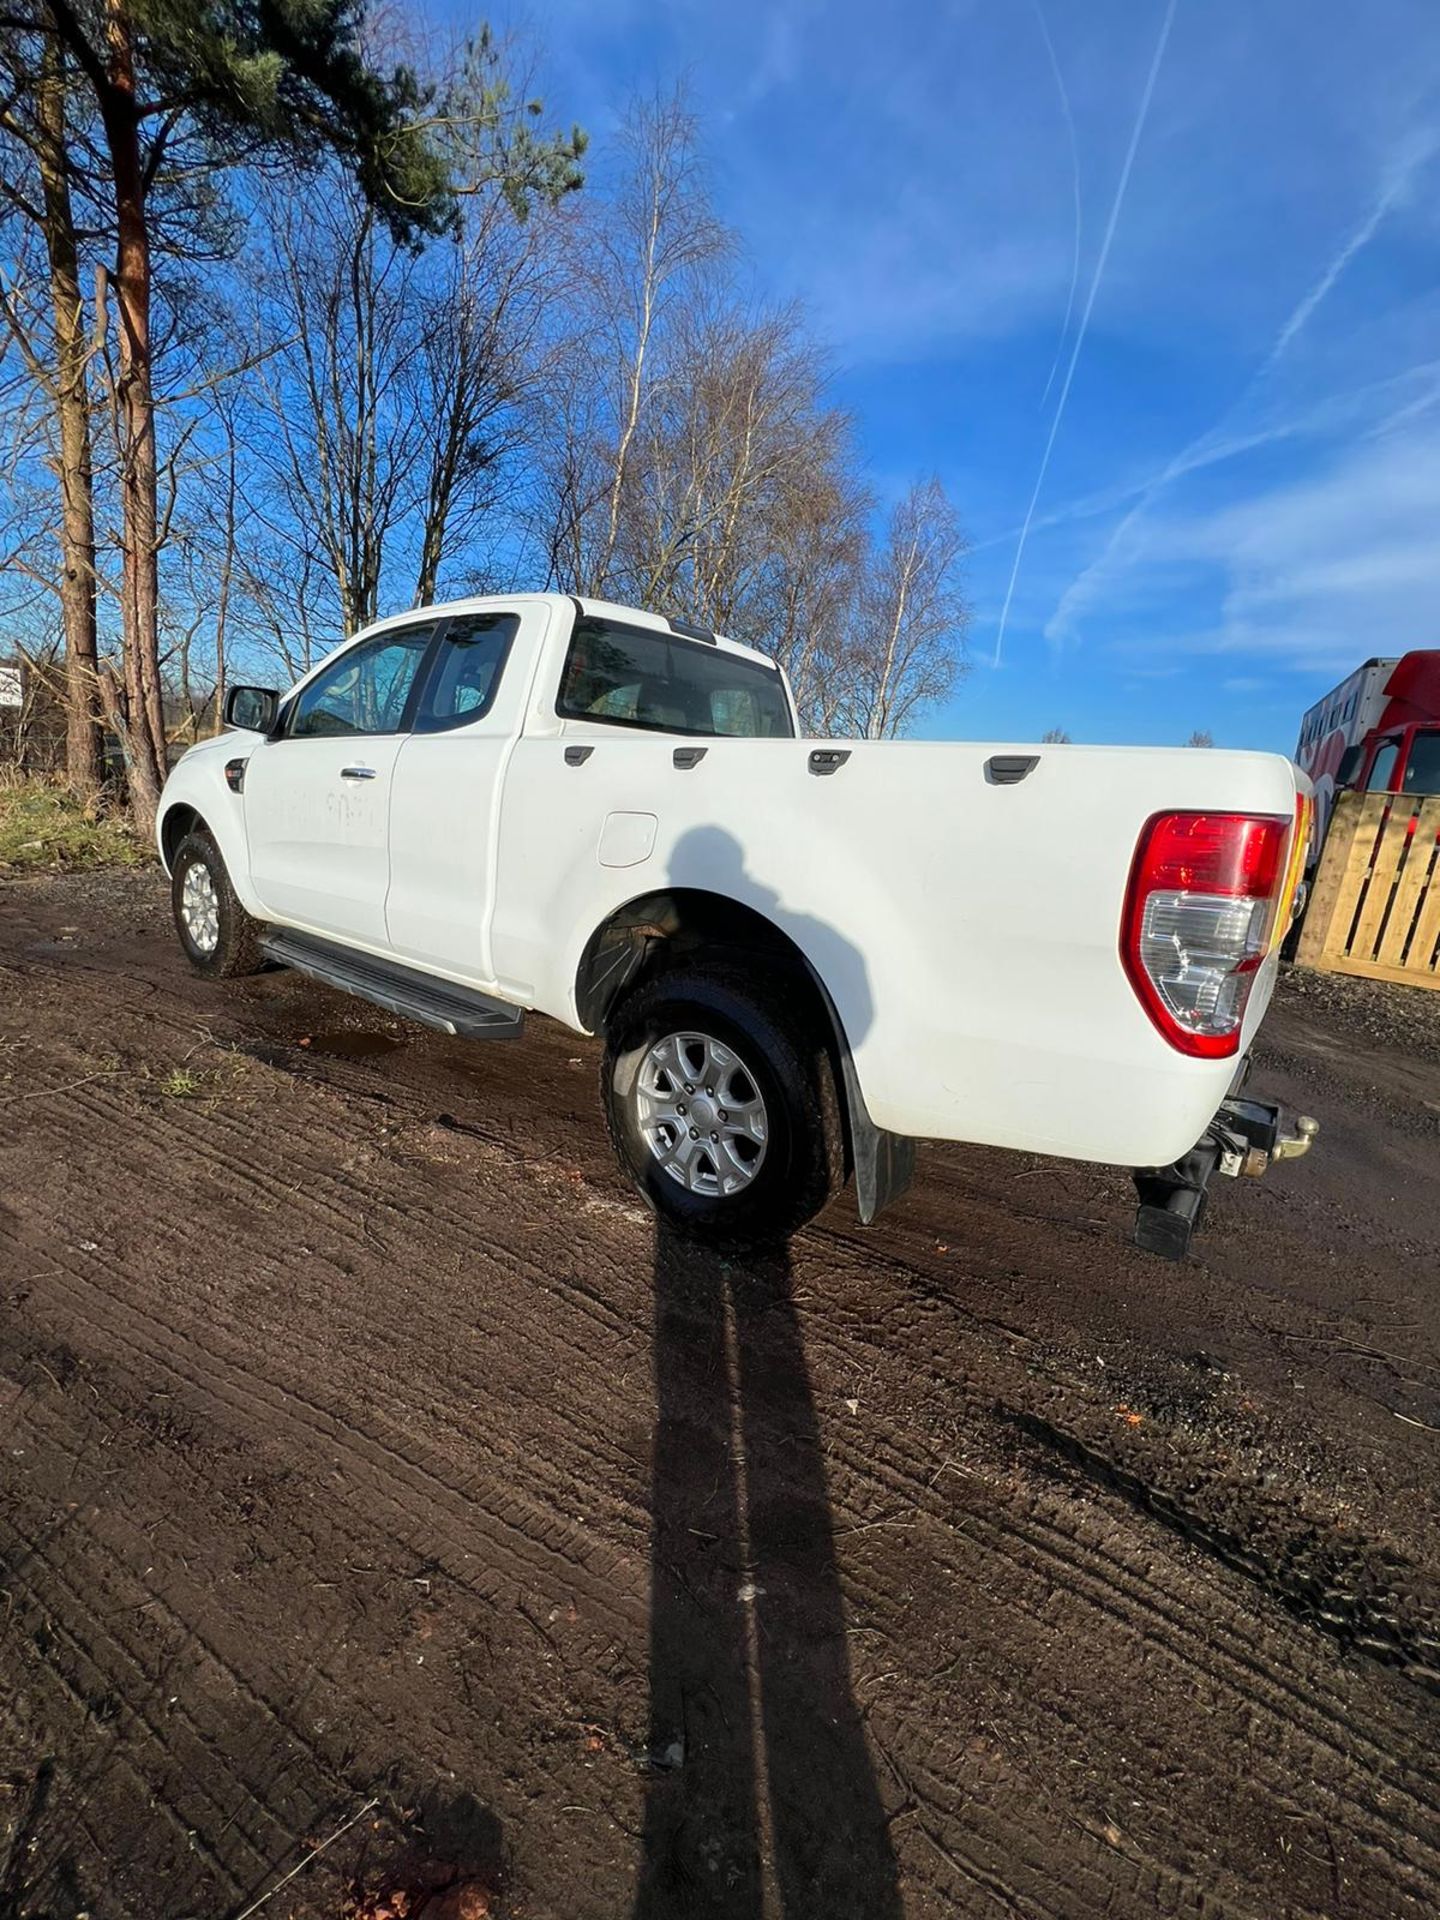 2017 FORD RANGER KING CAB EXSTRA CAB CAB AND HALF - Image 7 of 19